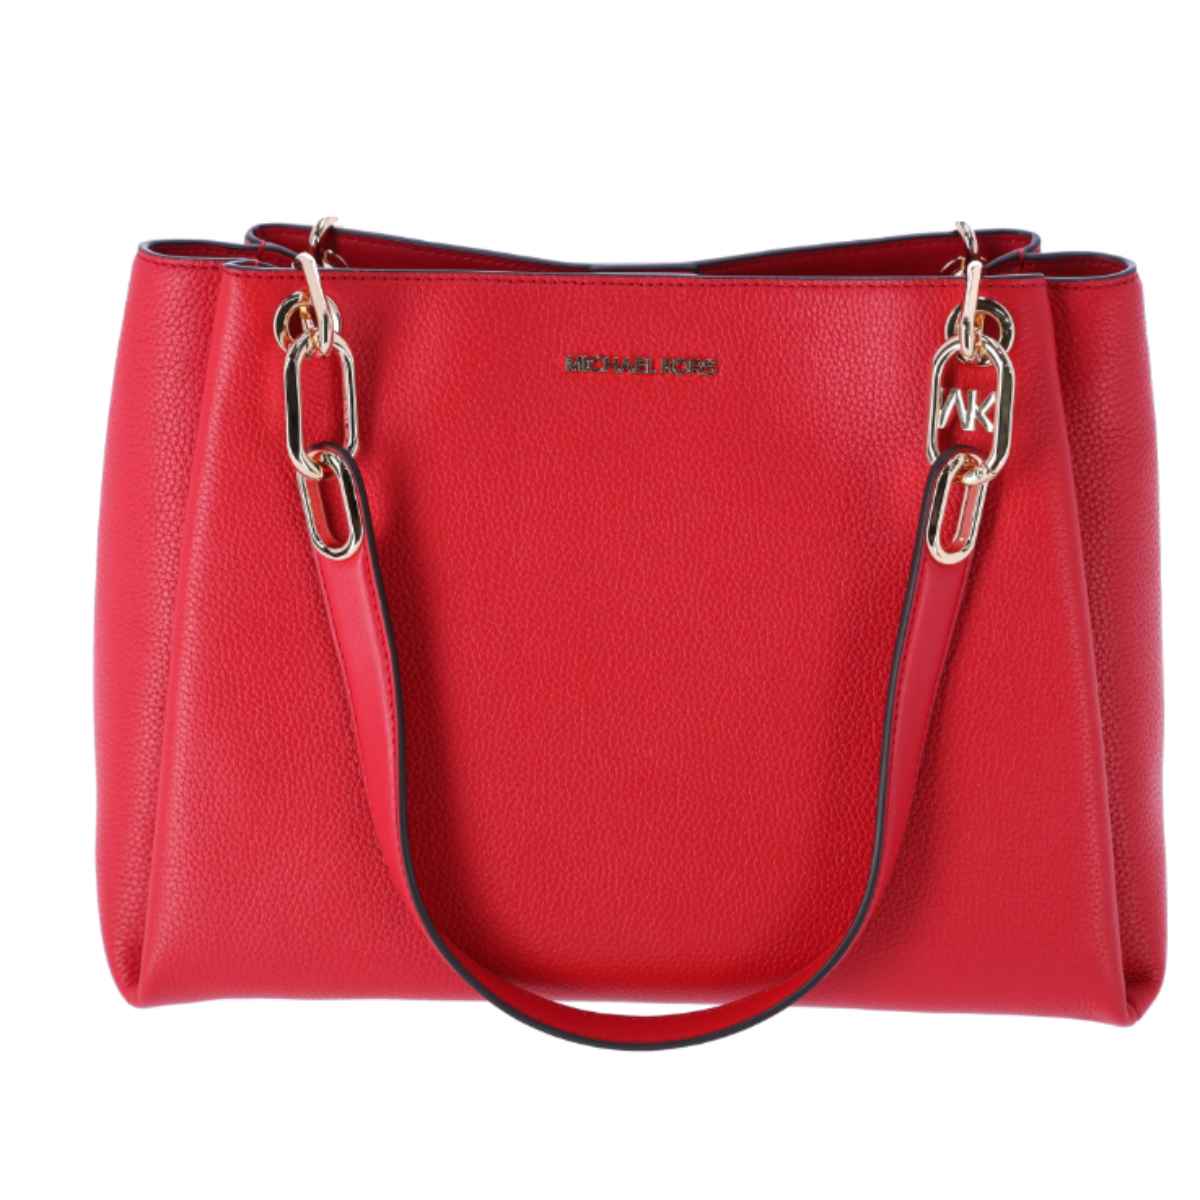 Br@Nded Triple compartment large shoulder bag for $89.99 shipped ...